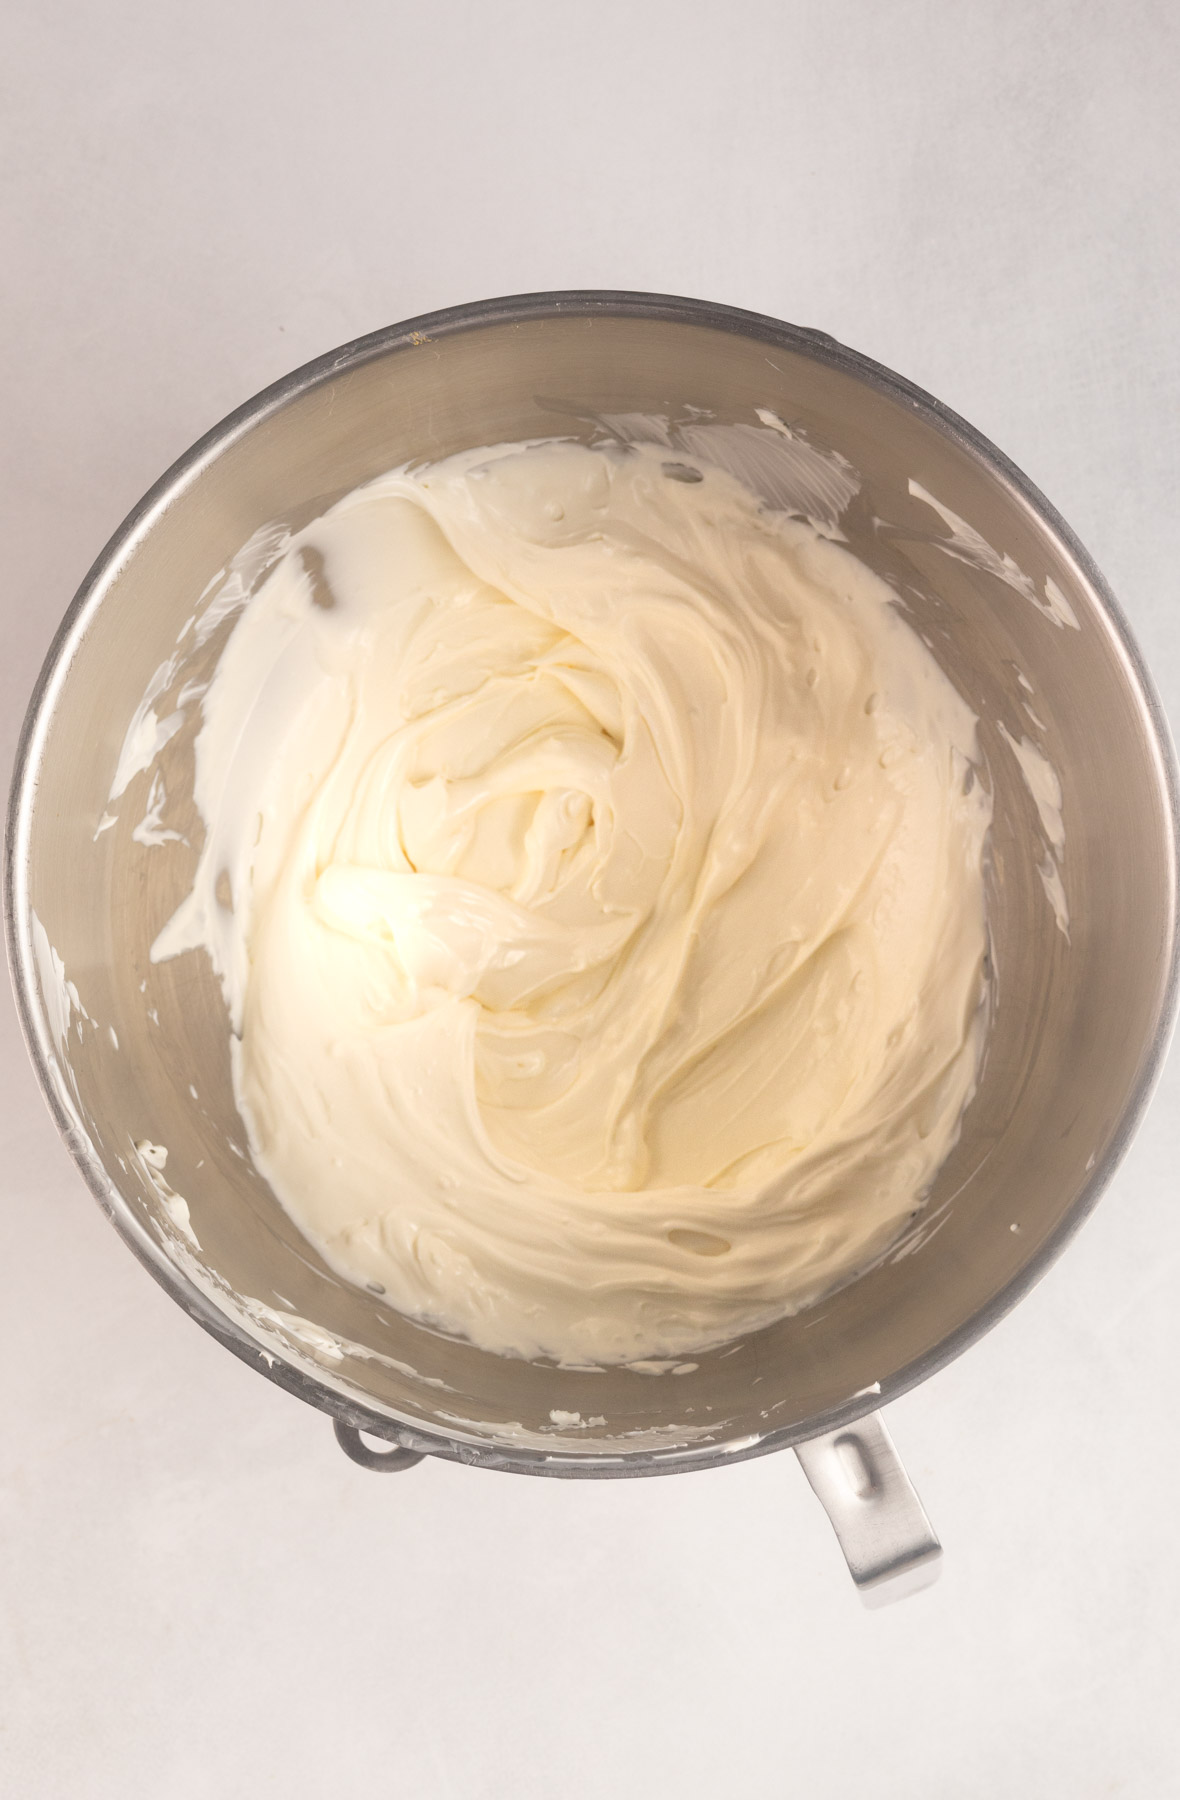 Image shows creamed together sour cream and cream cheese for gluten free pumpkin cheesecake.